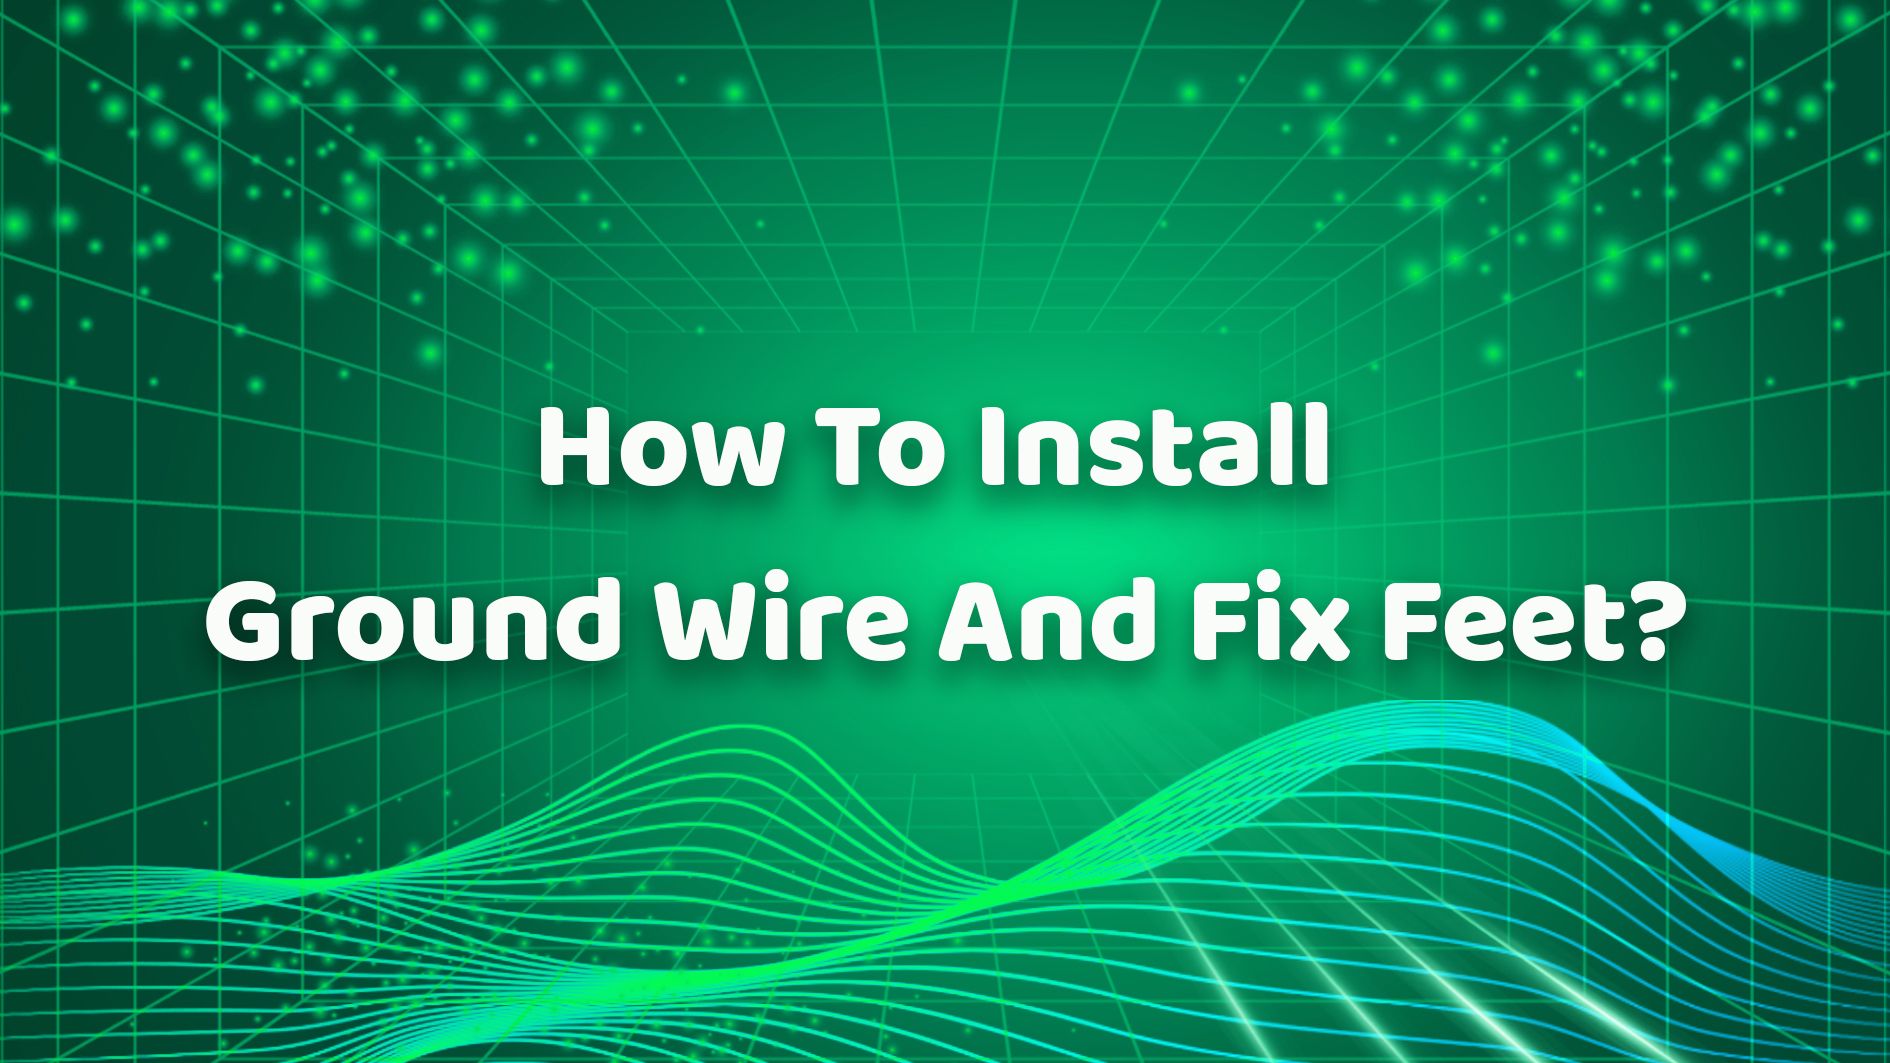 How To Install Ground Wire And Fix Feet？